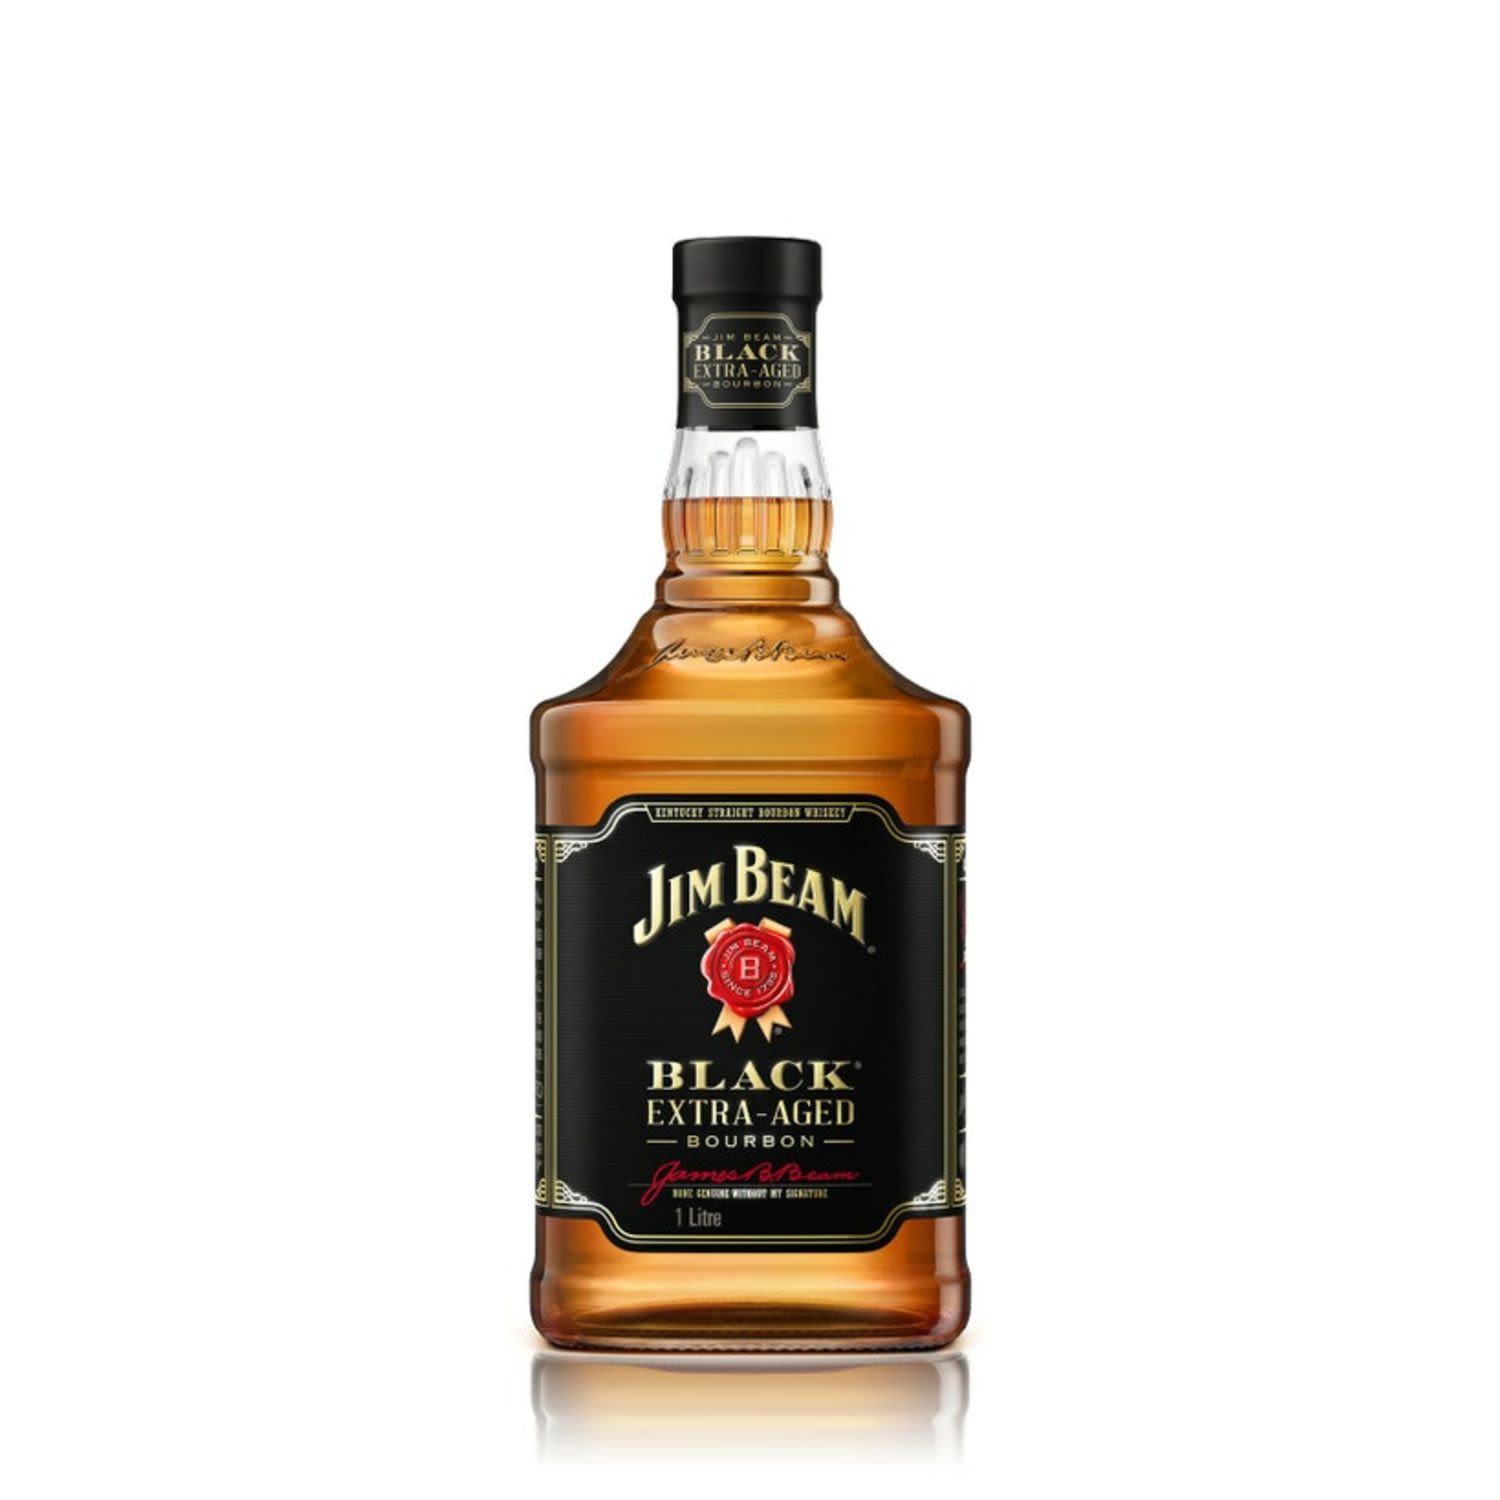 Our premium, 86-proof bourbon whiskey spends years longer being aged in our American White Oak barrels than our original Jim Beam. It’s those extra years of aging that give Jim Beam Black its full-bodied flavour with notes of smooth caramel and warm oak. The result is a full-bodied bourbon with an extra level of elegance and refinement that's meant to be sipped and savoured.<br /> <br />Alcohol Volume: 40.00%<br /><br />Pack Format: Bottle<br /><br />Standard Drinks: 31.6</br /><br />Pack Type: Bottle<br /><br />Country of Origin: USA<br />